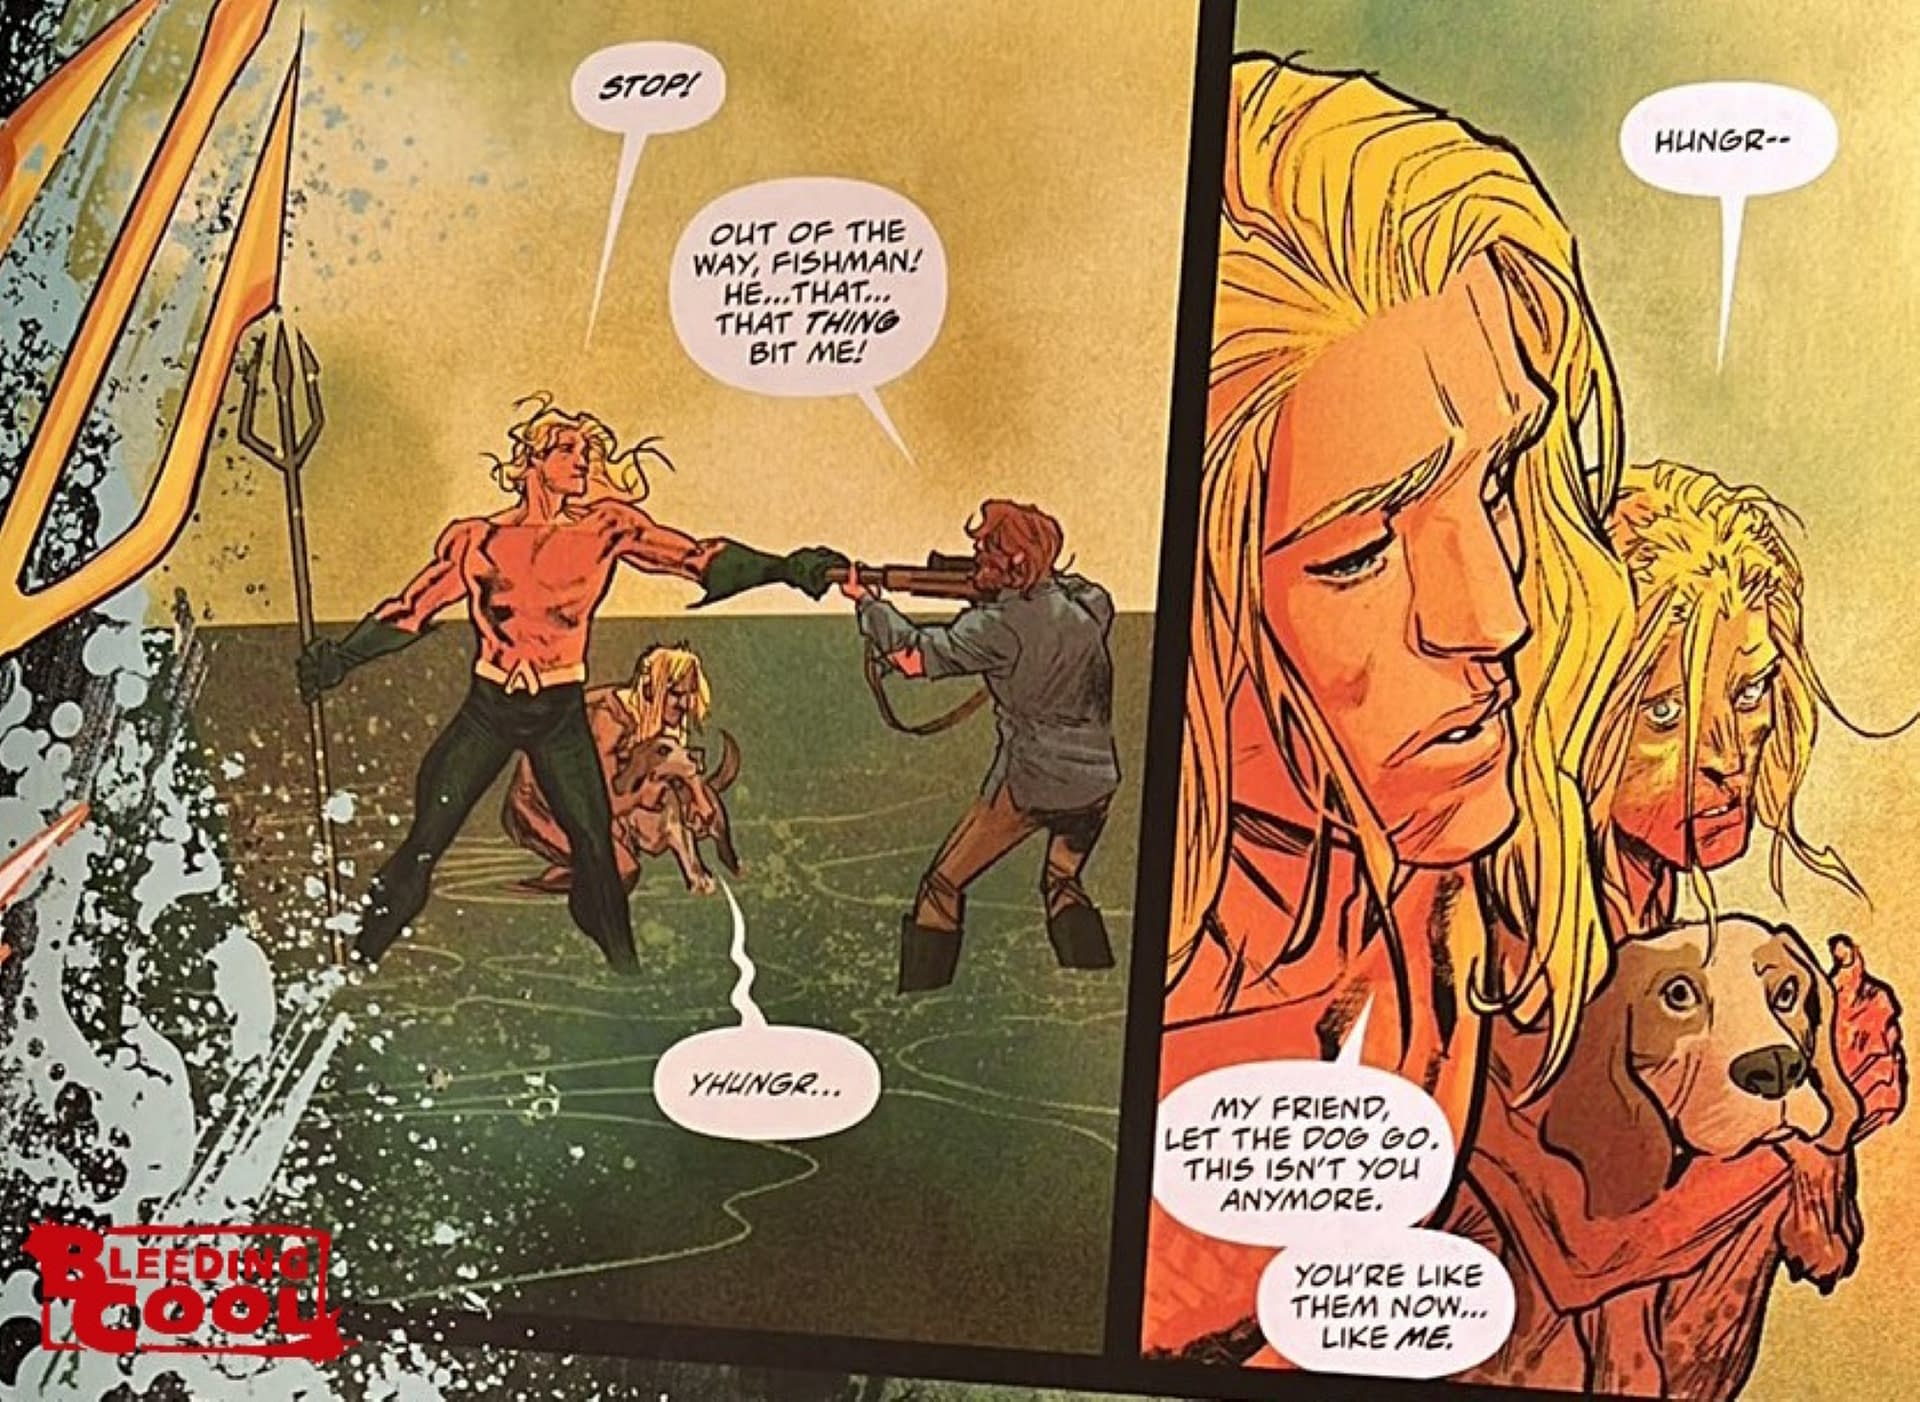 Dawn of DC Plans For Aquaman In 2023 (Lazarus Planet Spoilers)